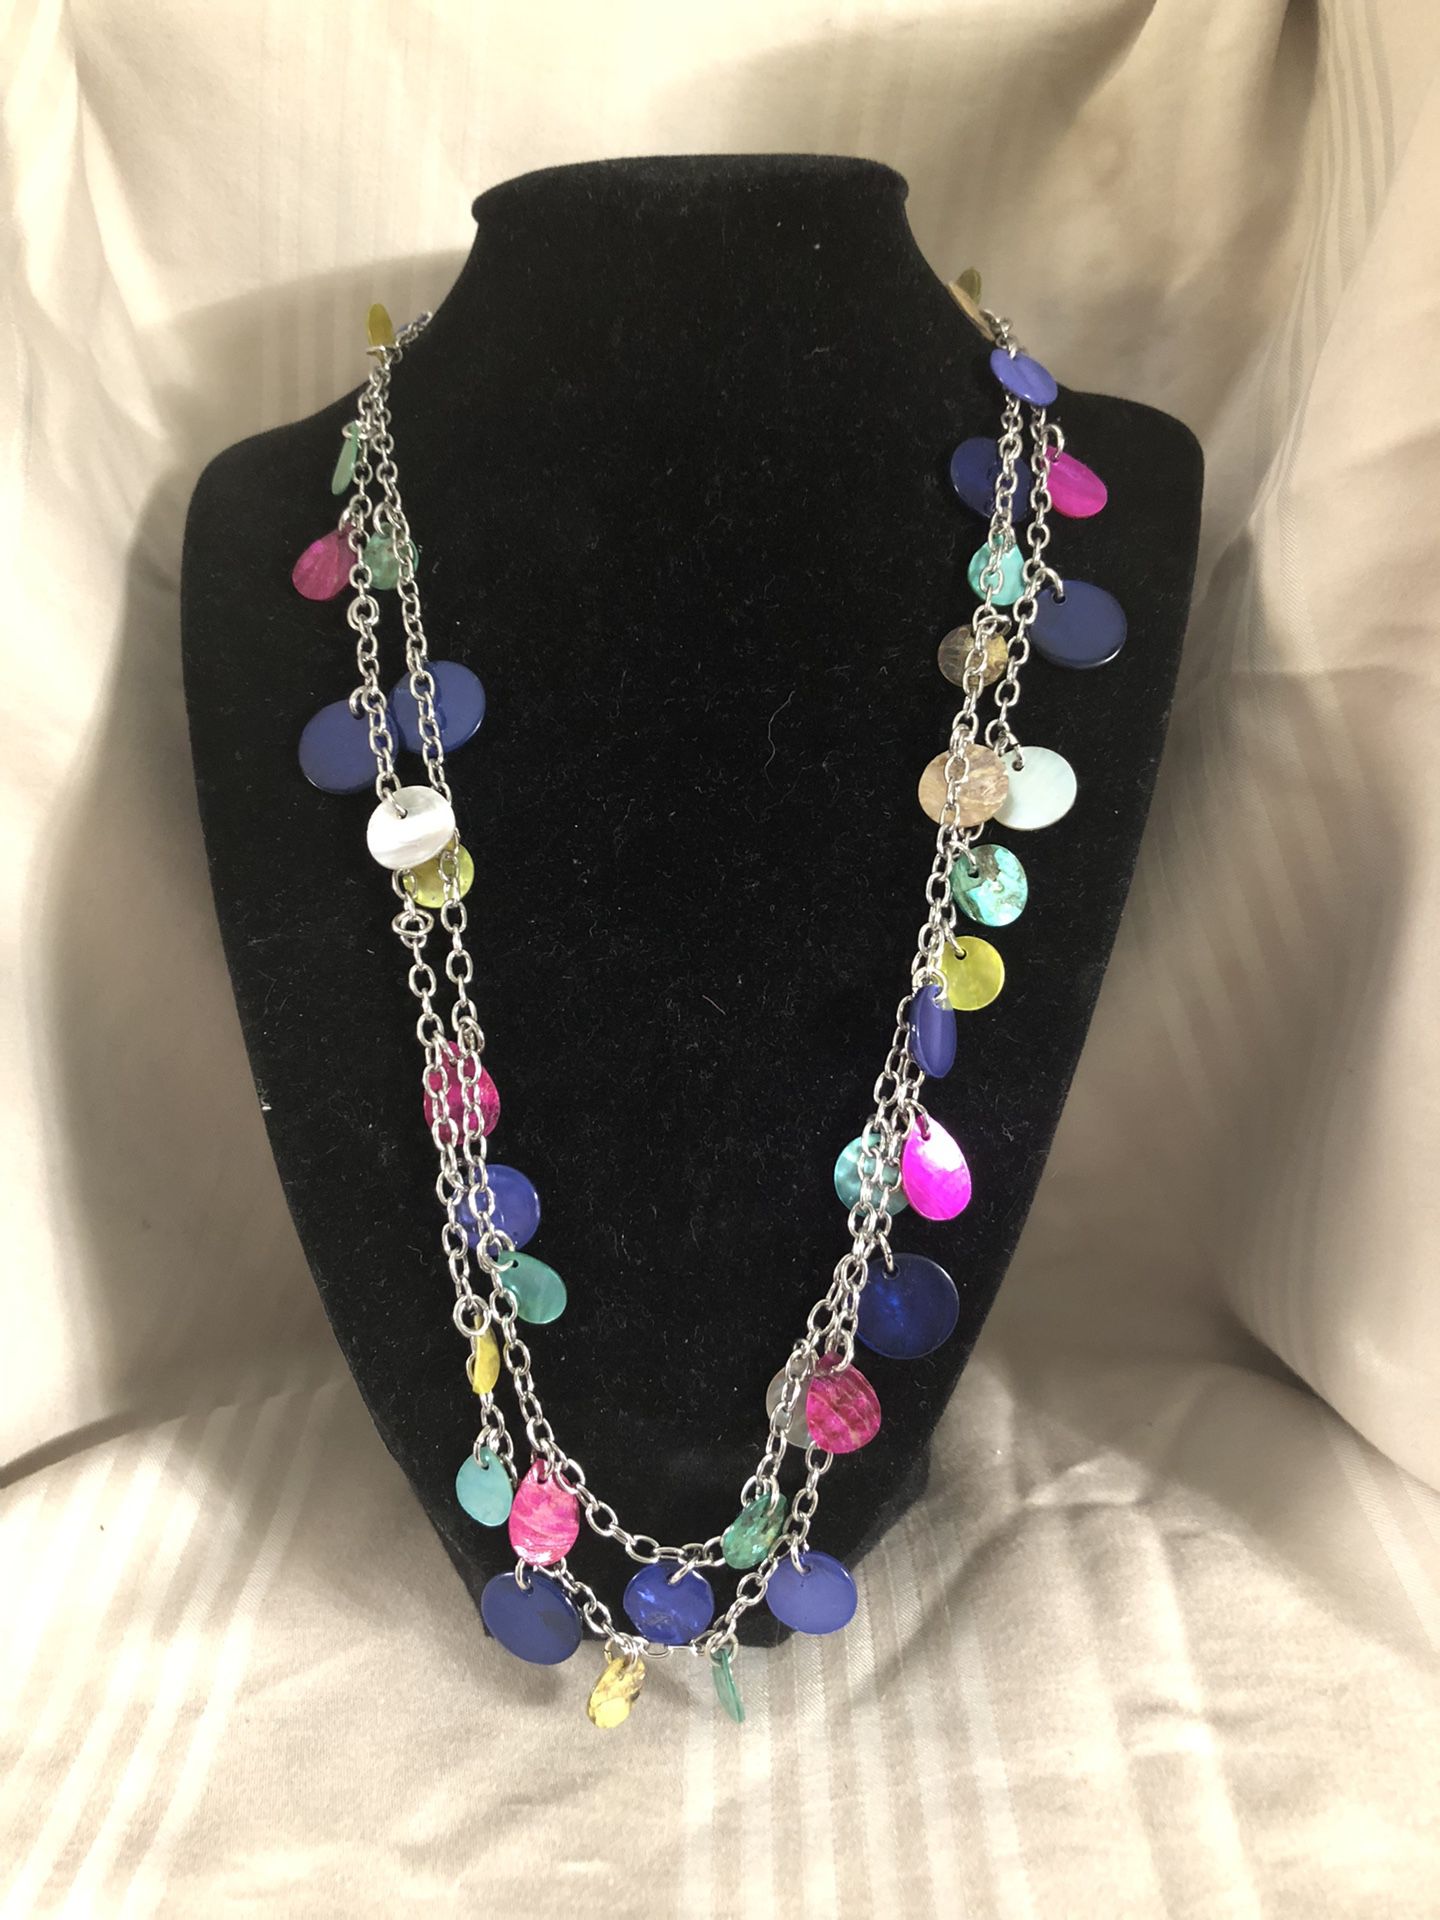 Lia Sophia Long Colorful Flat Disc Necklace 46” With 4” Extension Great Condition 